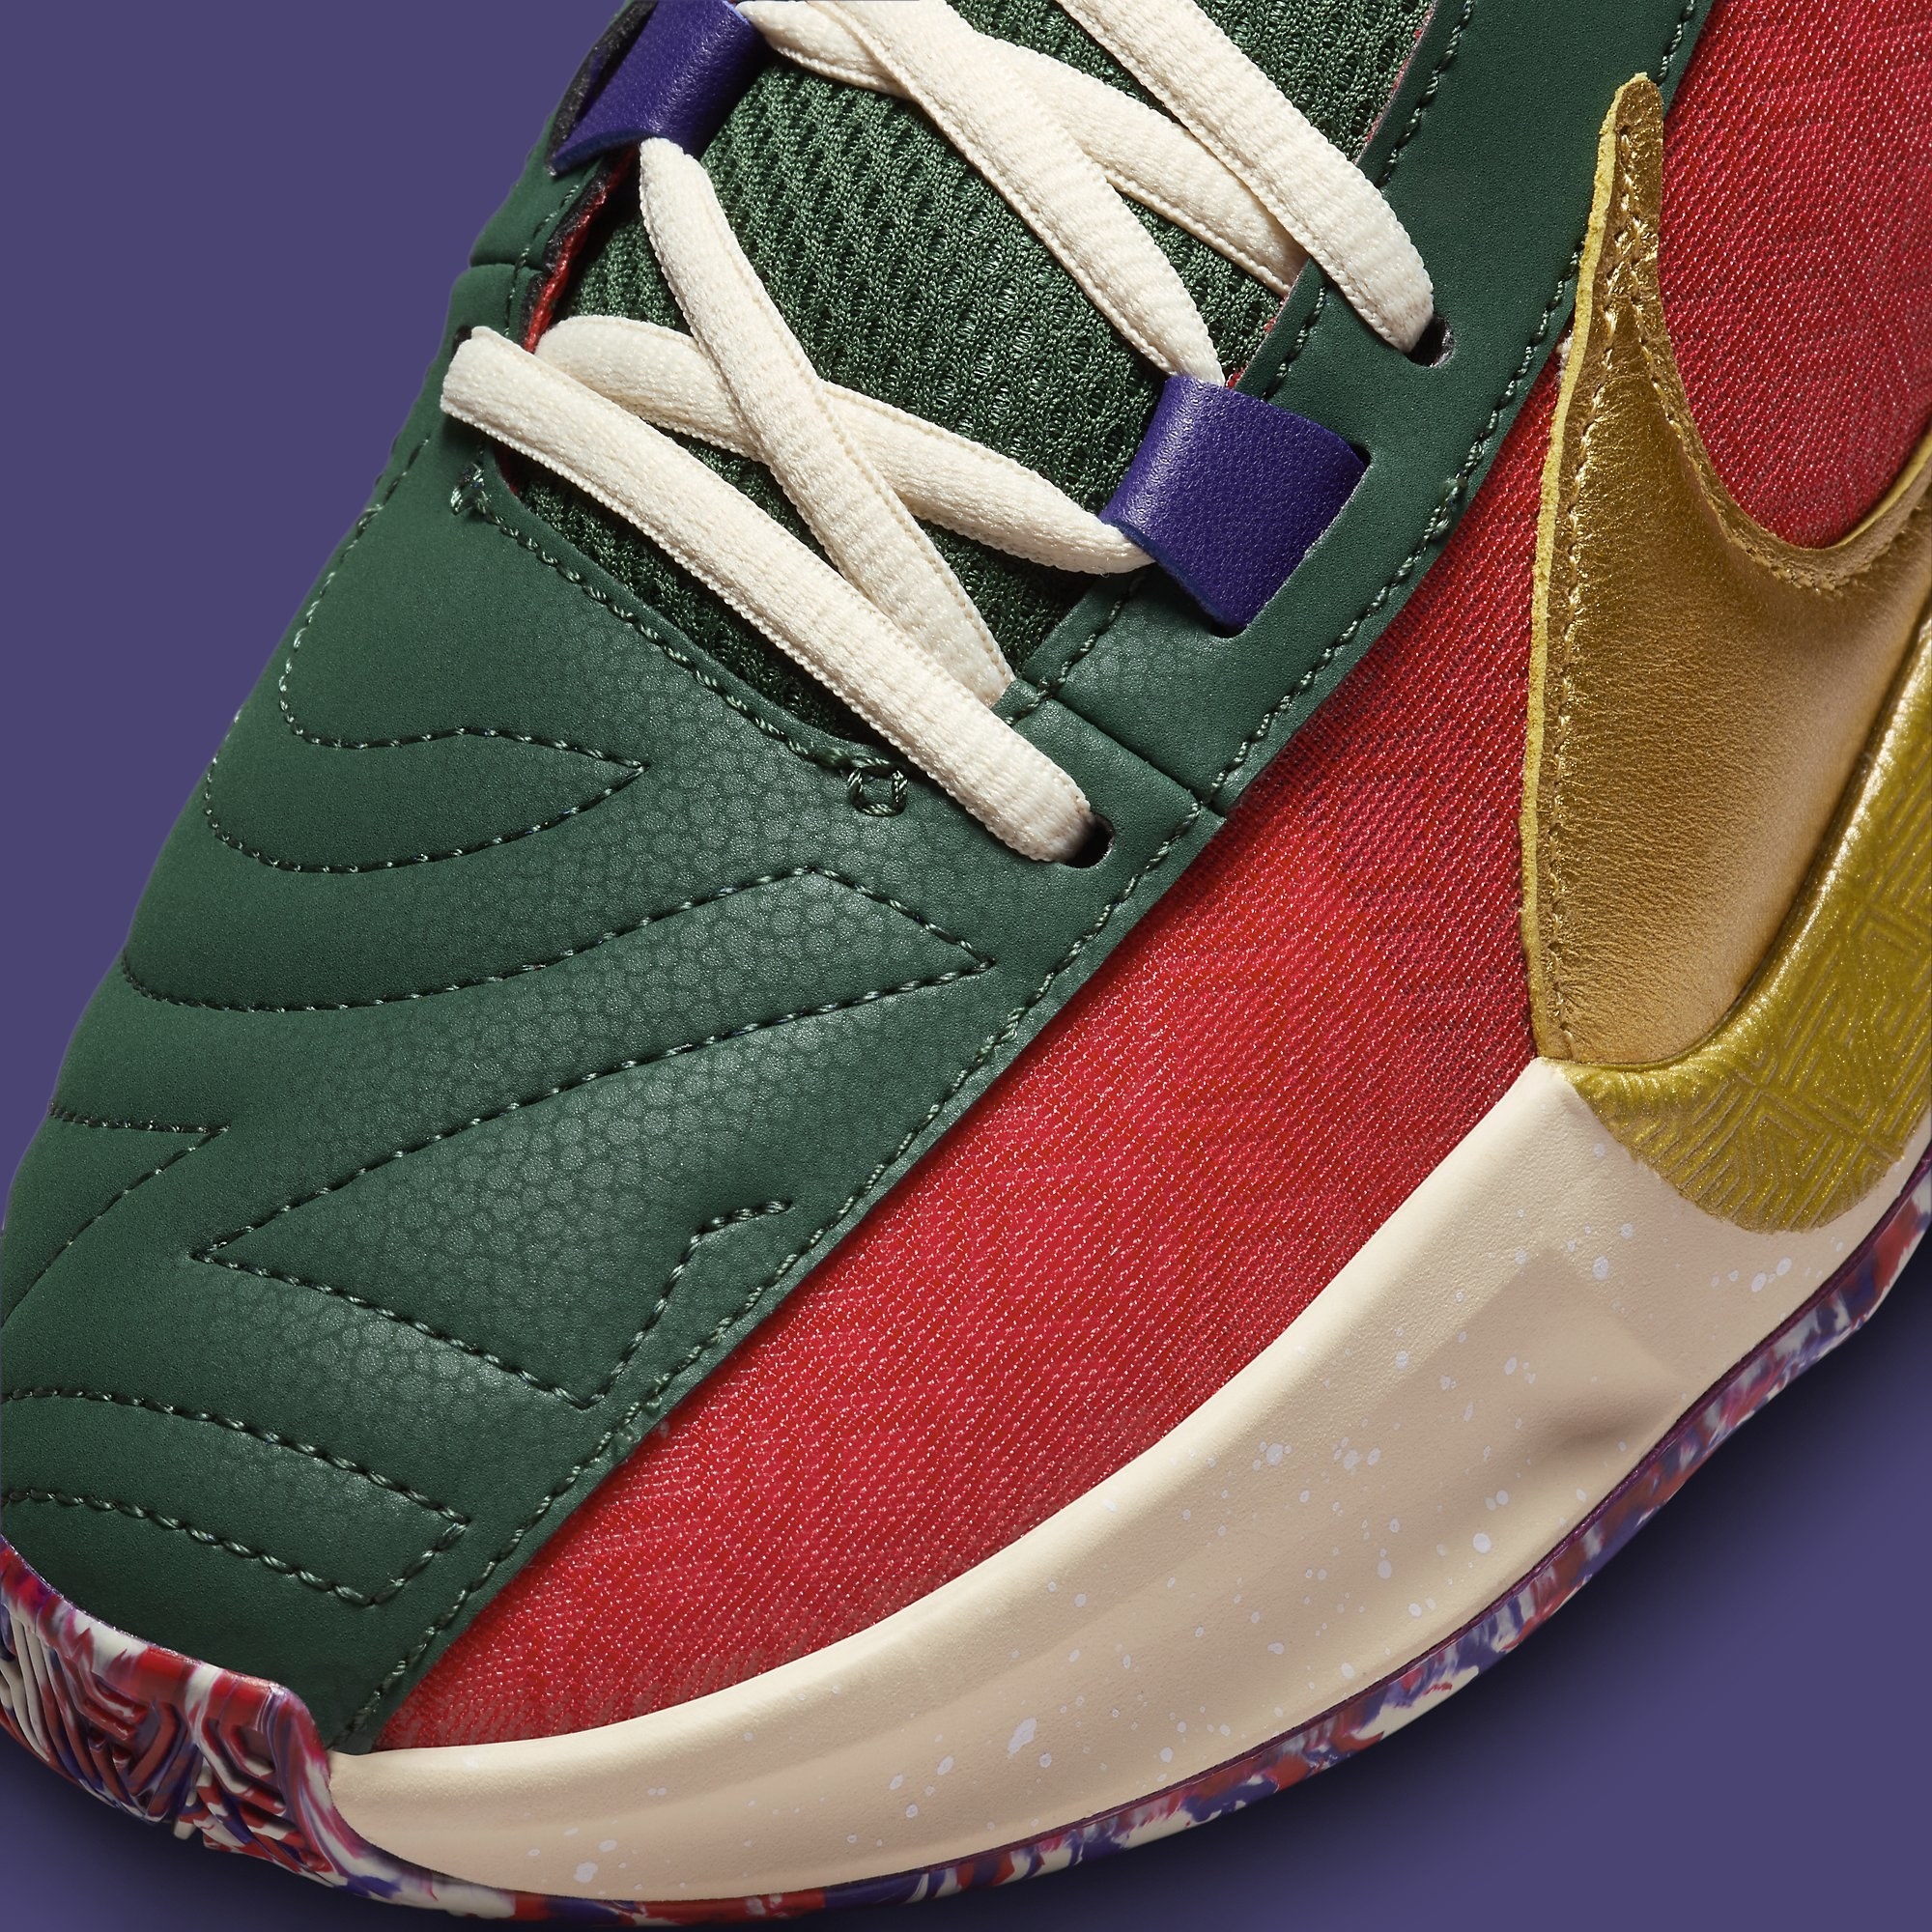 An Official Look at Giannis Antetokounmpo's Fifth Signature Shoe